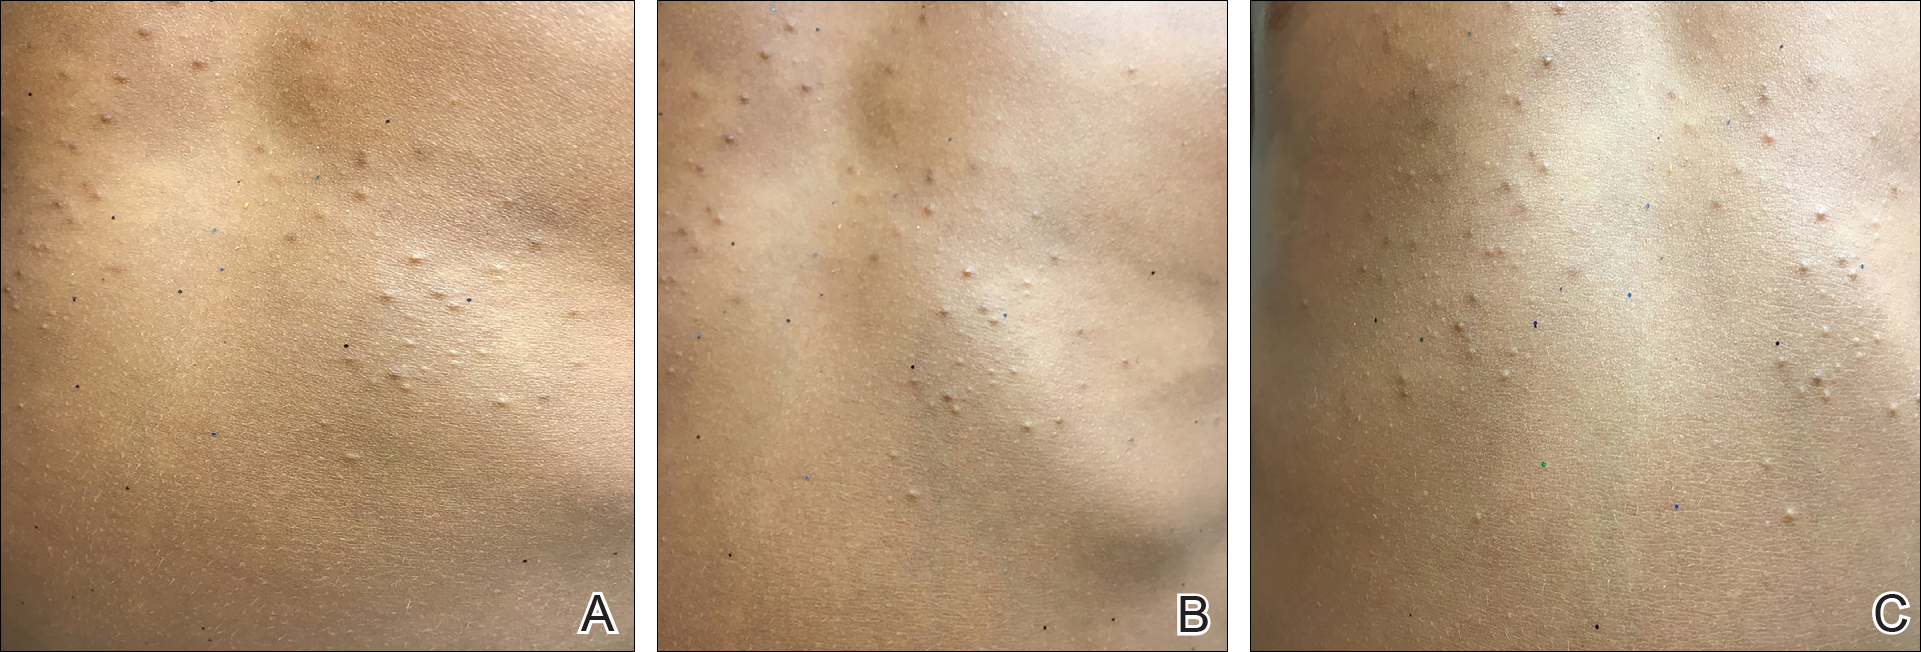 Eruptive Vellus Hair Cysts in Identical Triplets With Dermoscopic Findings  | MDedge Dermatology